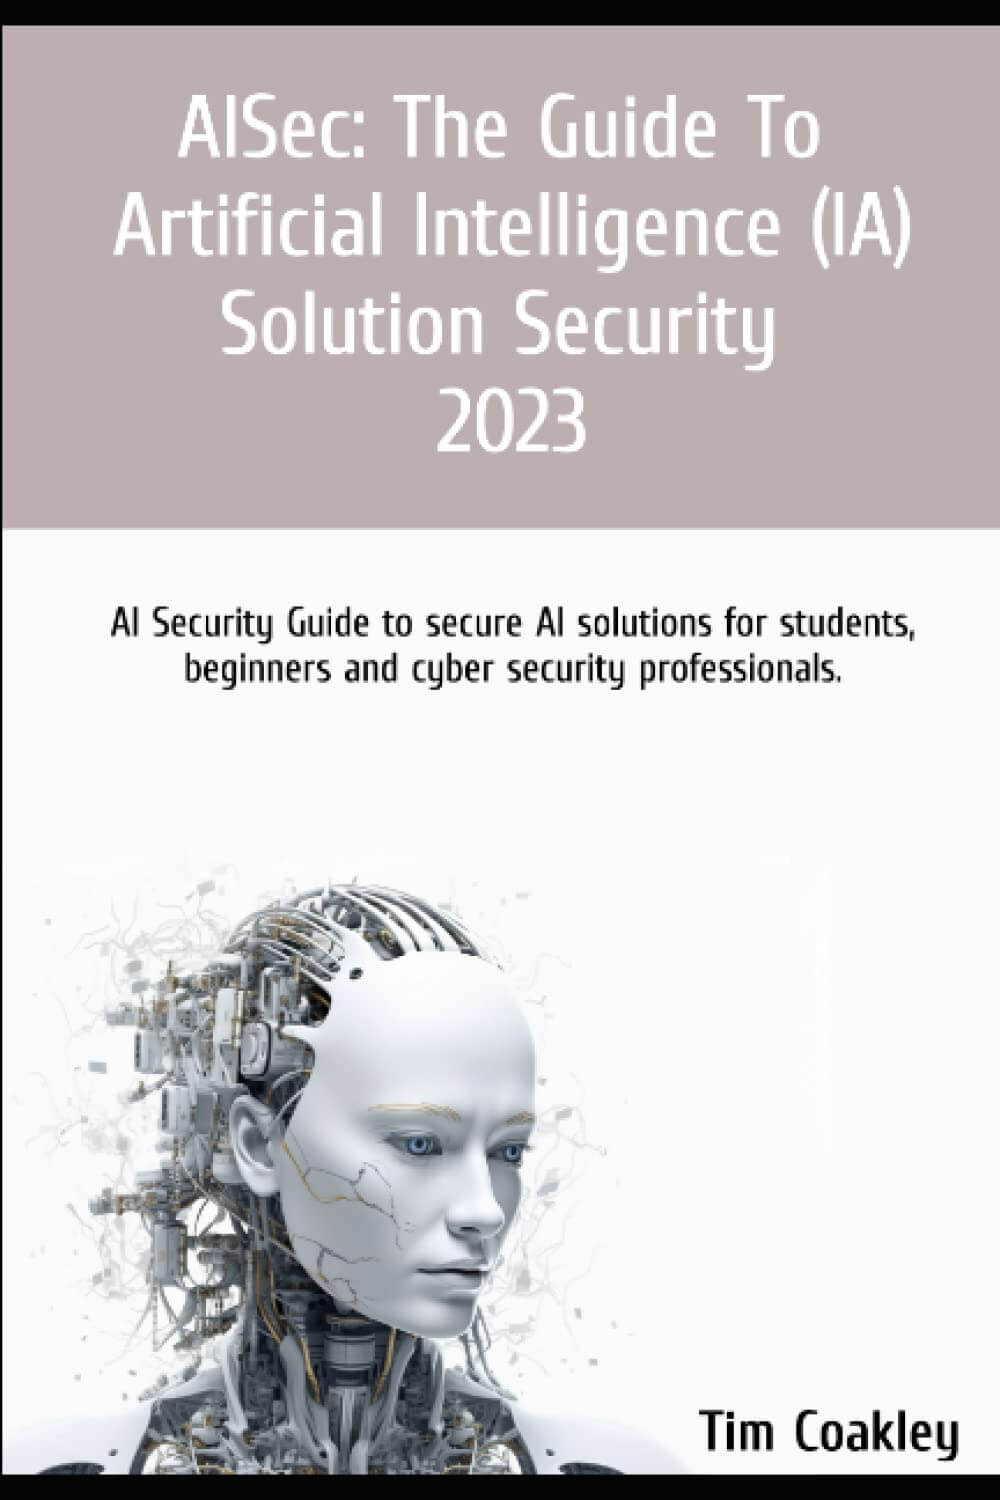 AISec: The Guide to Artificial Intelligence (AI) Solution Security 2023: AI Security Guide to secure AI solutions for students, beginners and cyber security professionals.